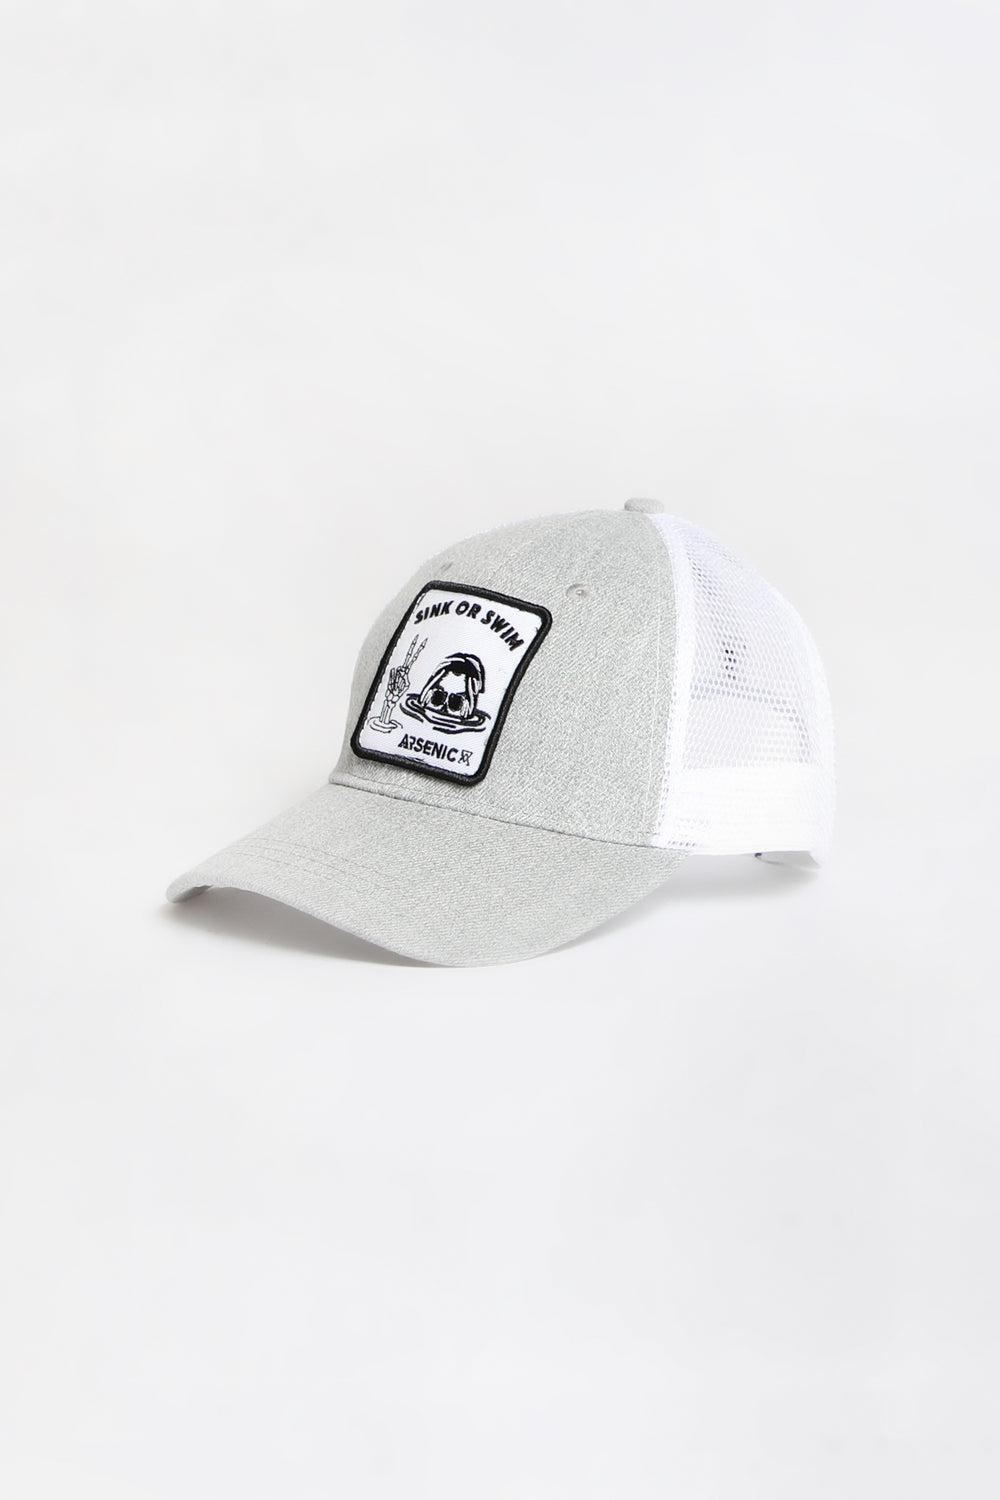 Arsenic Youth Sink Patch Trucker Hat Heather Grey